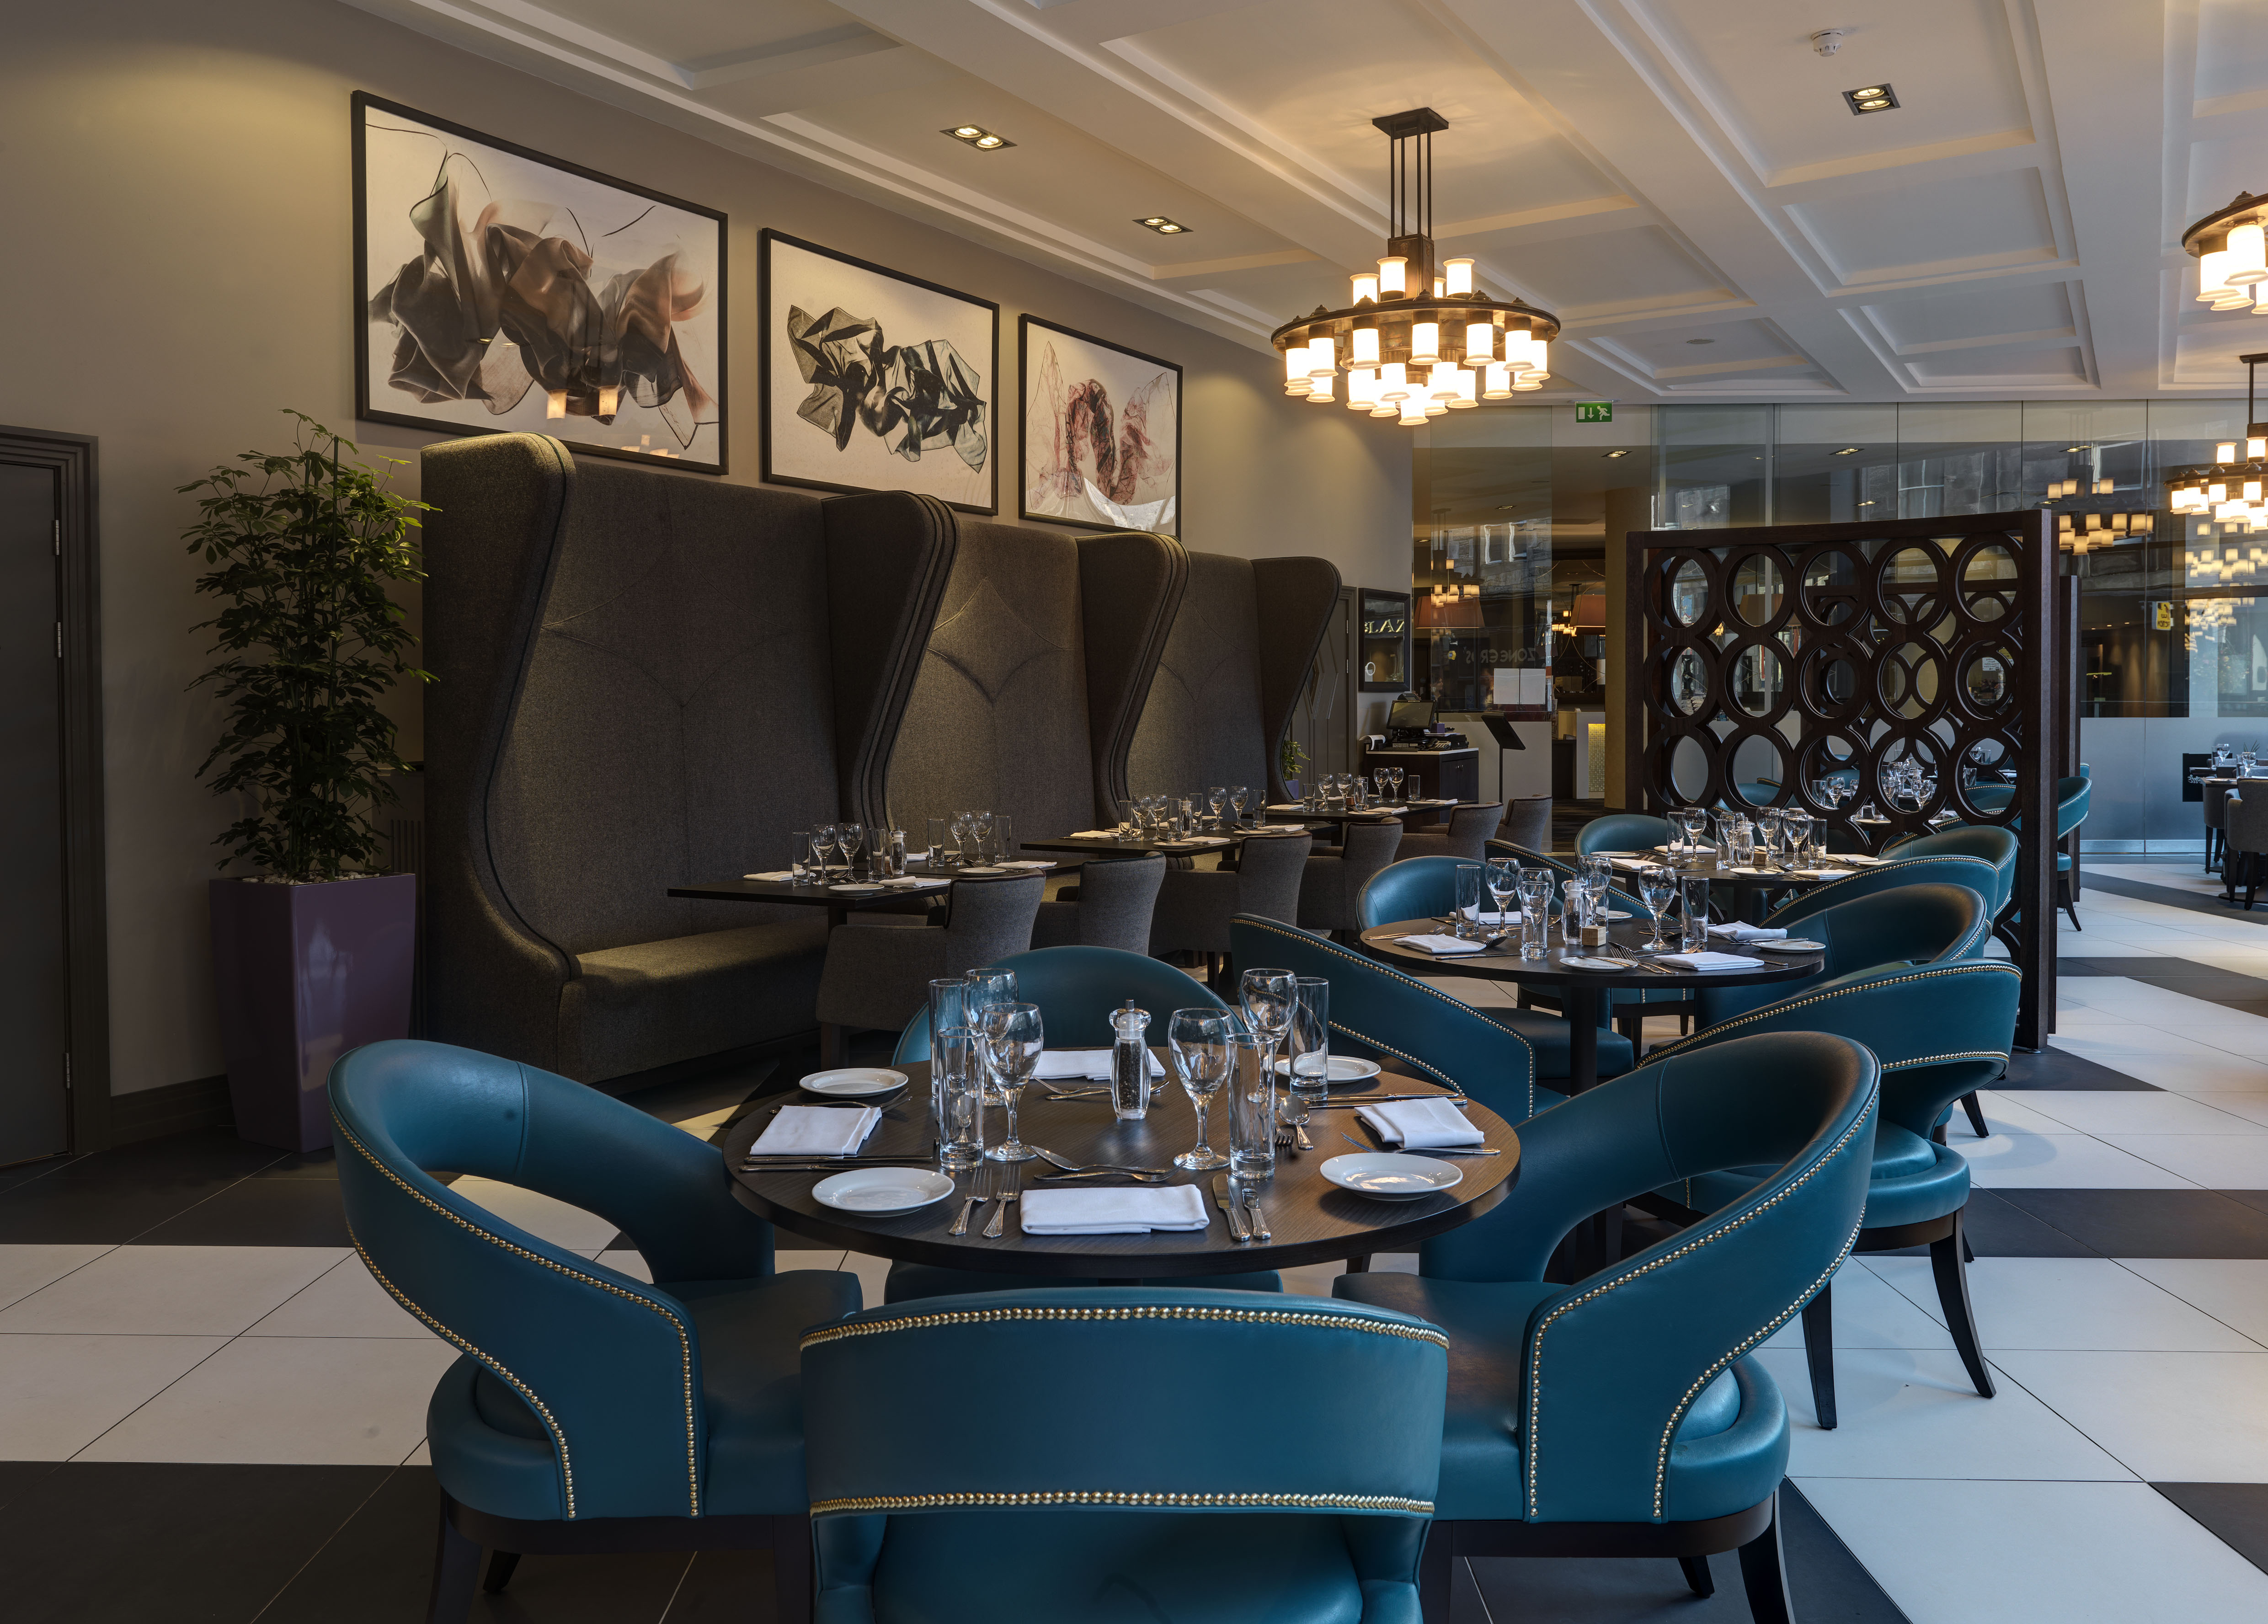 Wall Art, Booths, Green Chairs and Dining Tables With Place Settings and Glasses in Bread Street Brasserie Restaurant